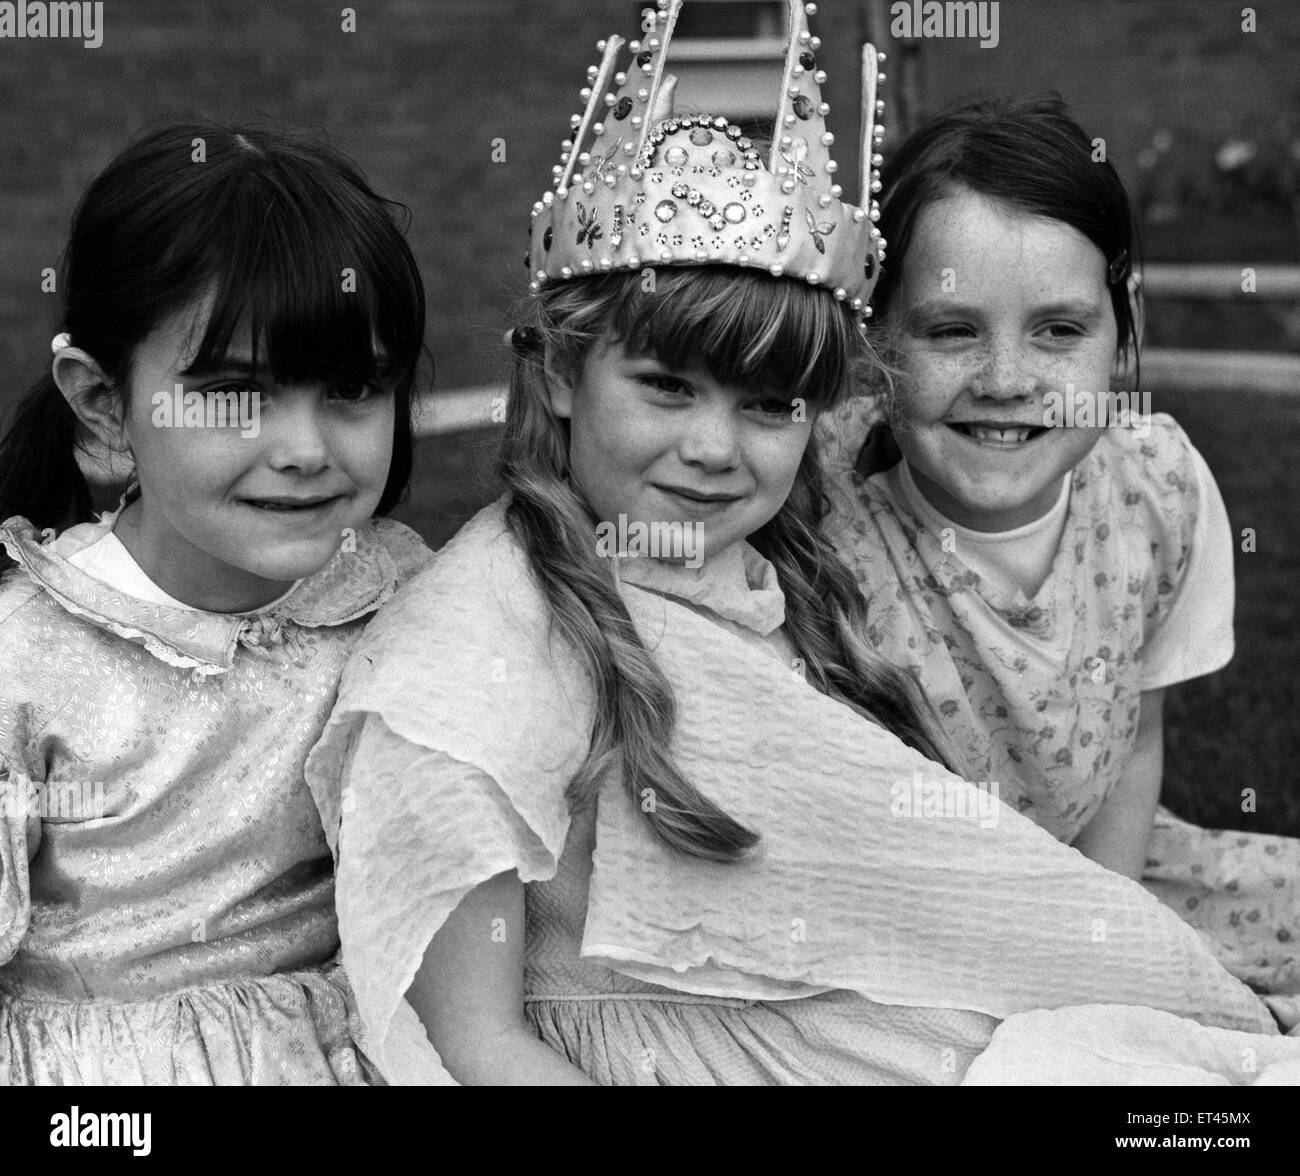 Liverpool May Day Parade, 1st May 1971. Julie Creed aged 8, dressed as May Queen, pictured with her attendants, Paula Merriman aged 7 (left) and Margaret Hoare aged 9, all three attend the Bootle Children's Social Centre. Stock Photo